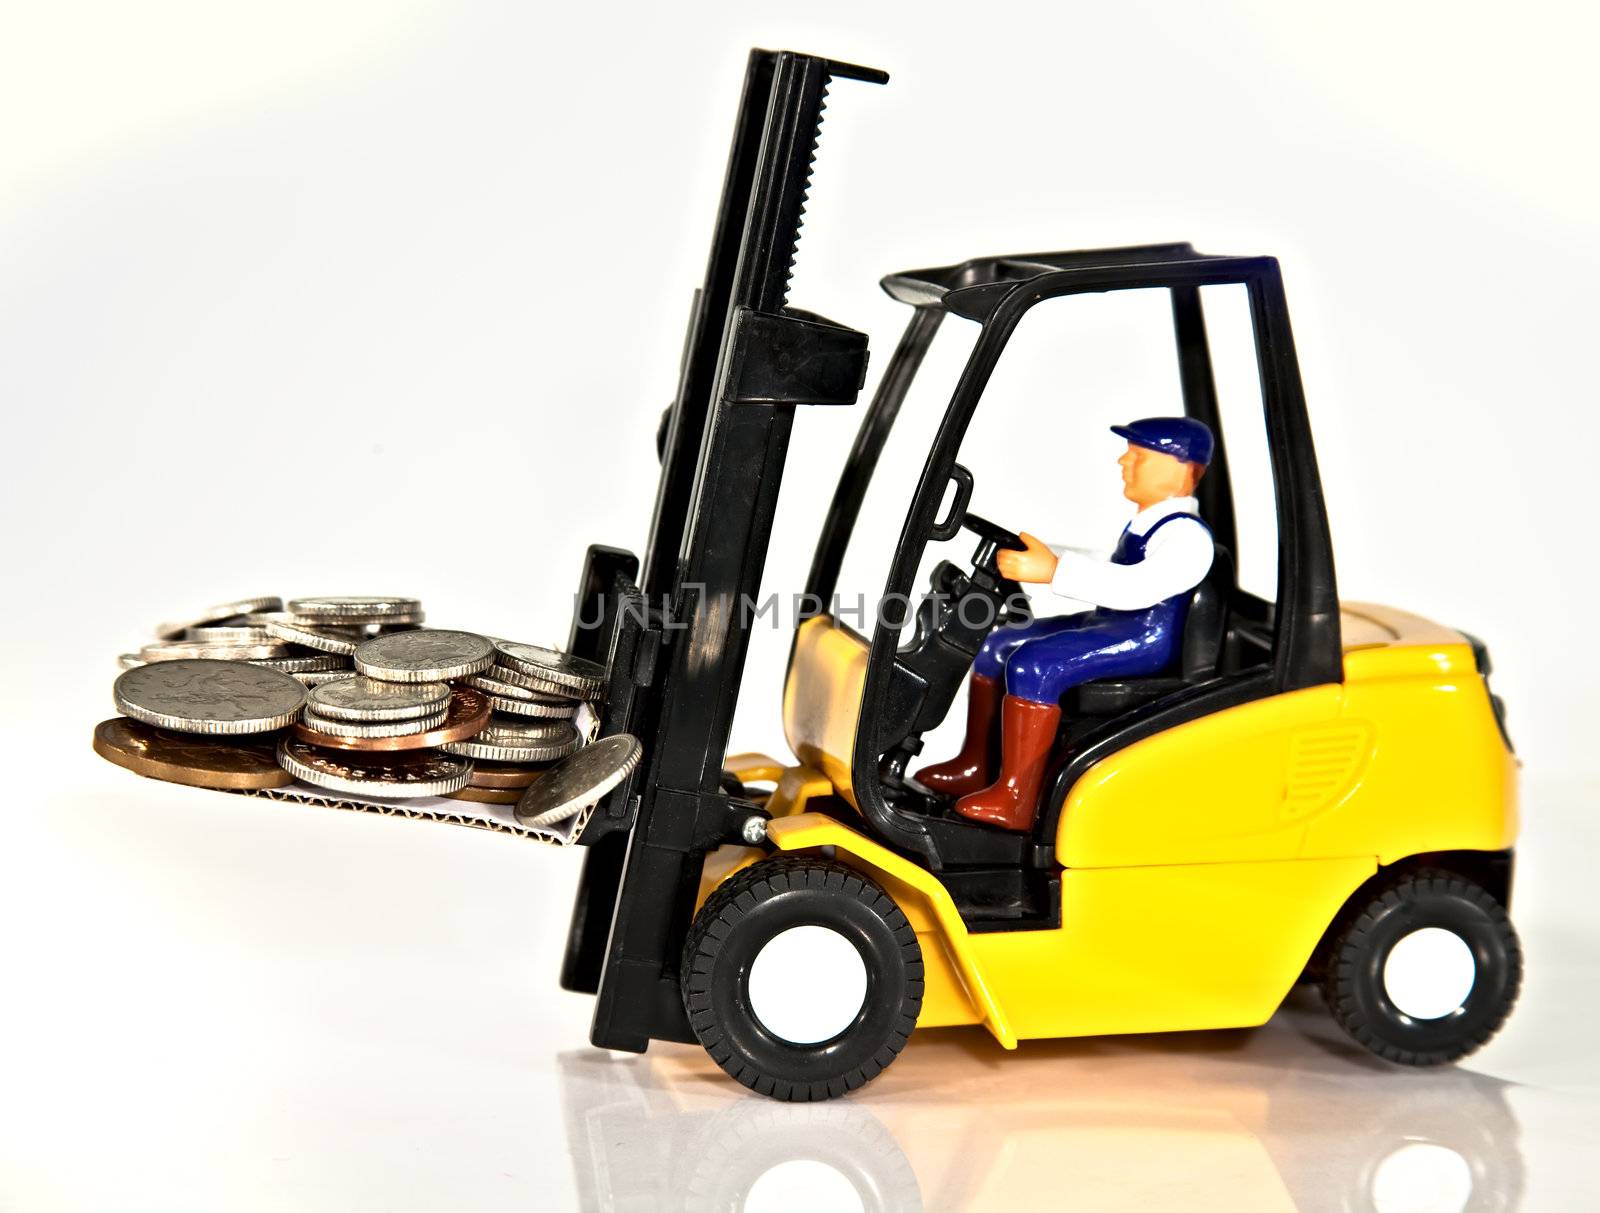 A toy fork lift truck lifting a pallet full of money